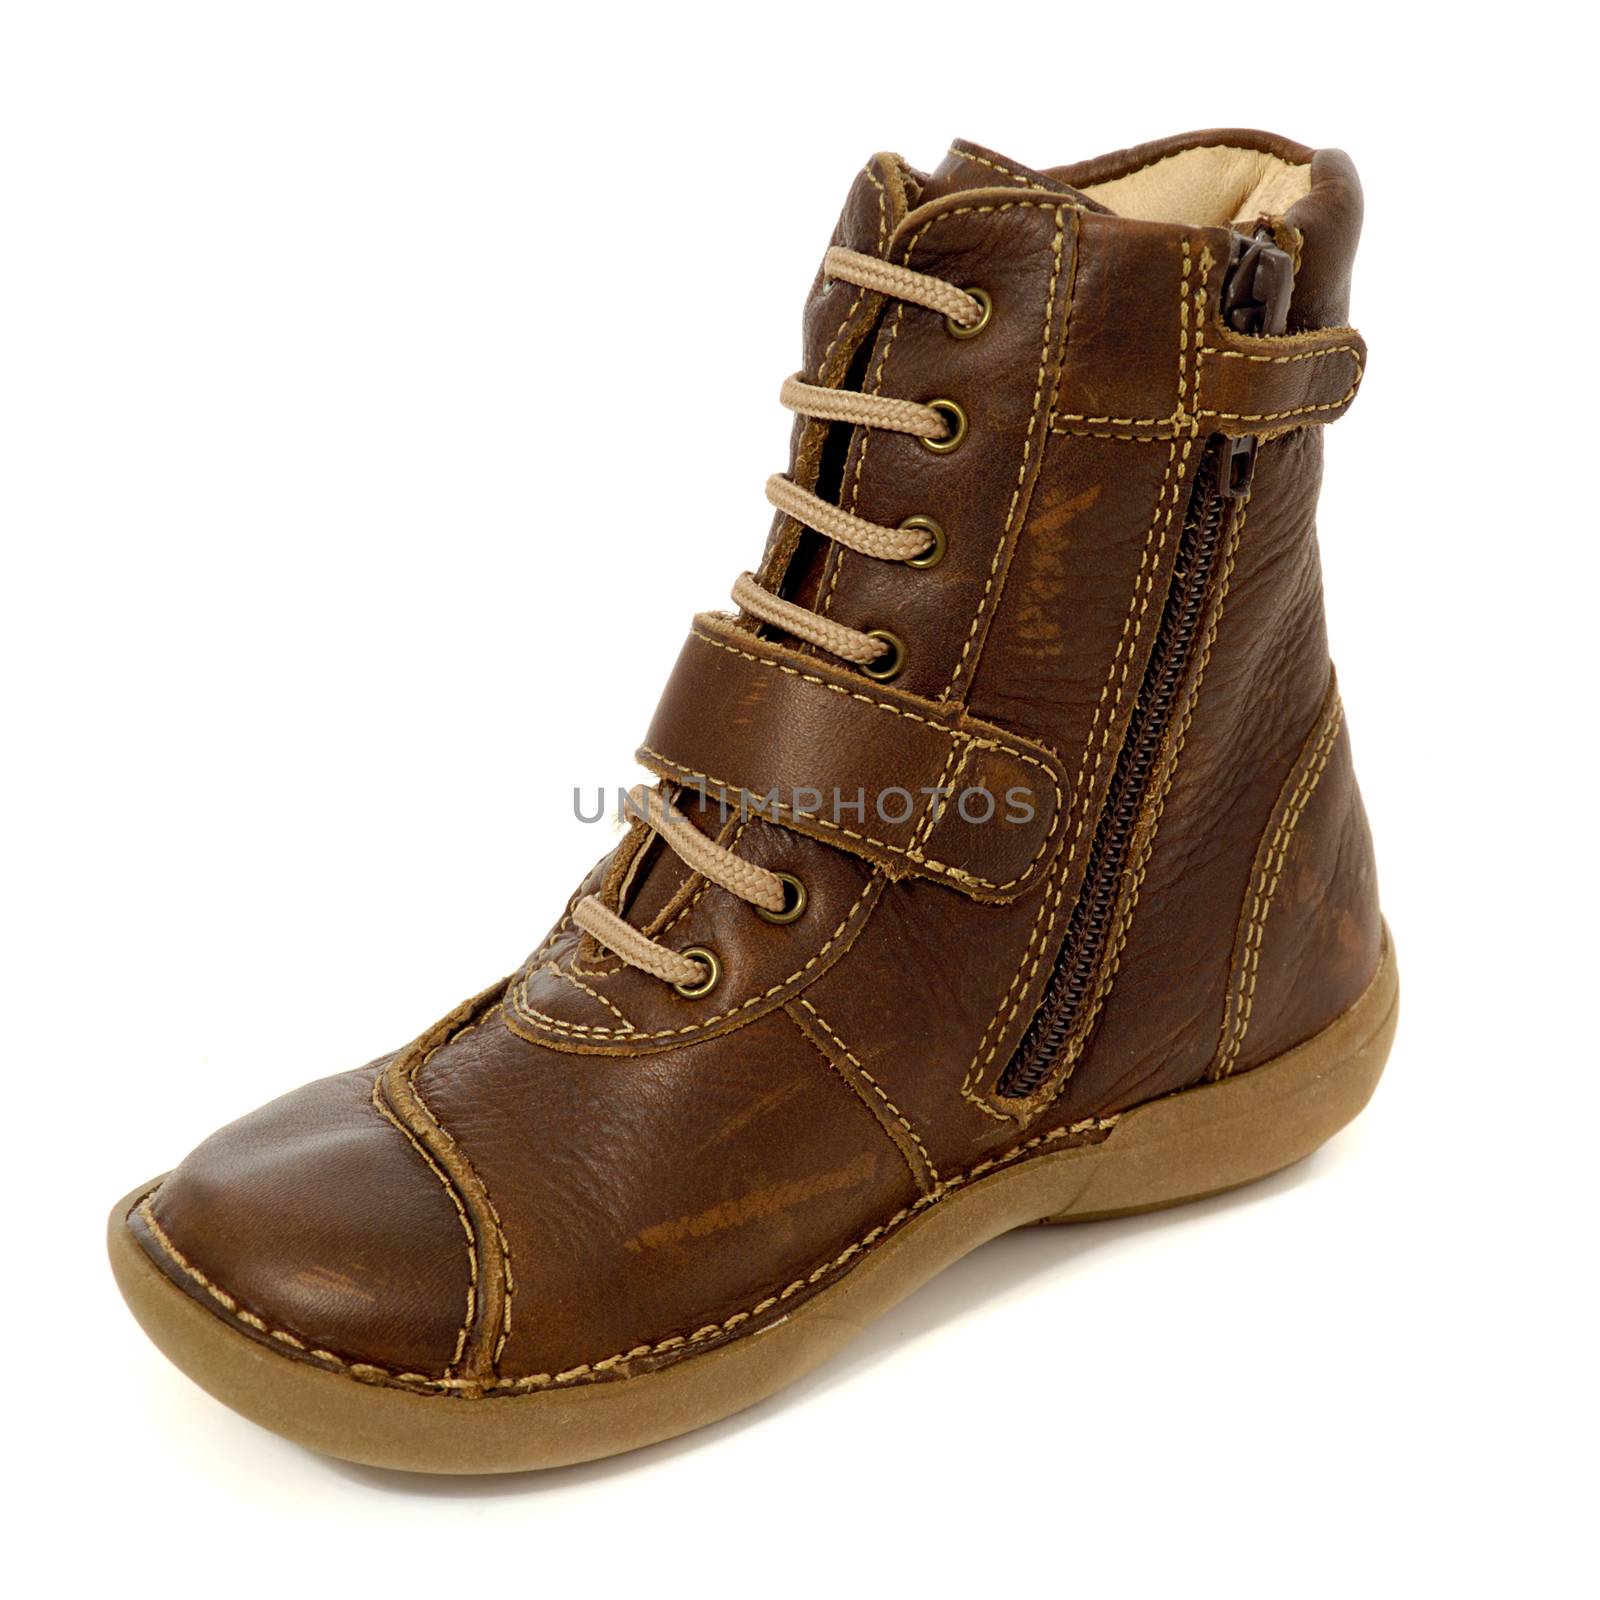 A brown boot. Taken on a clean white background.